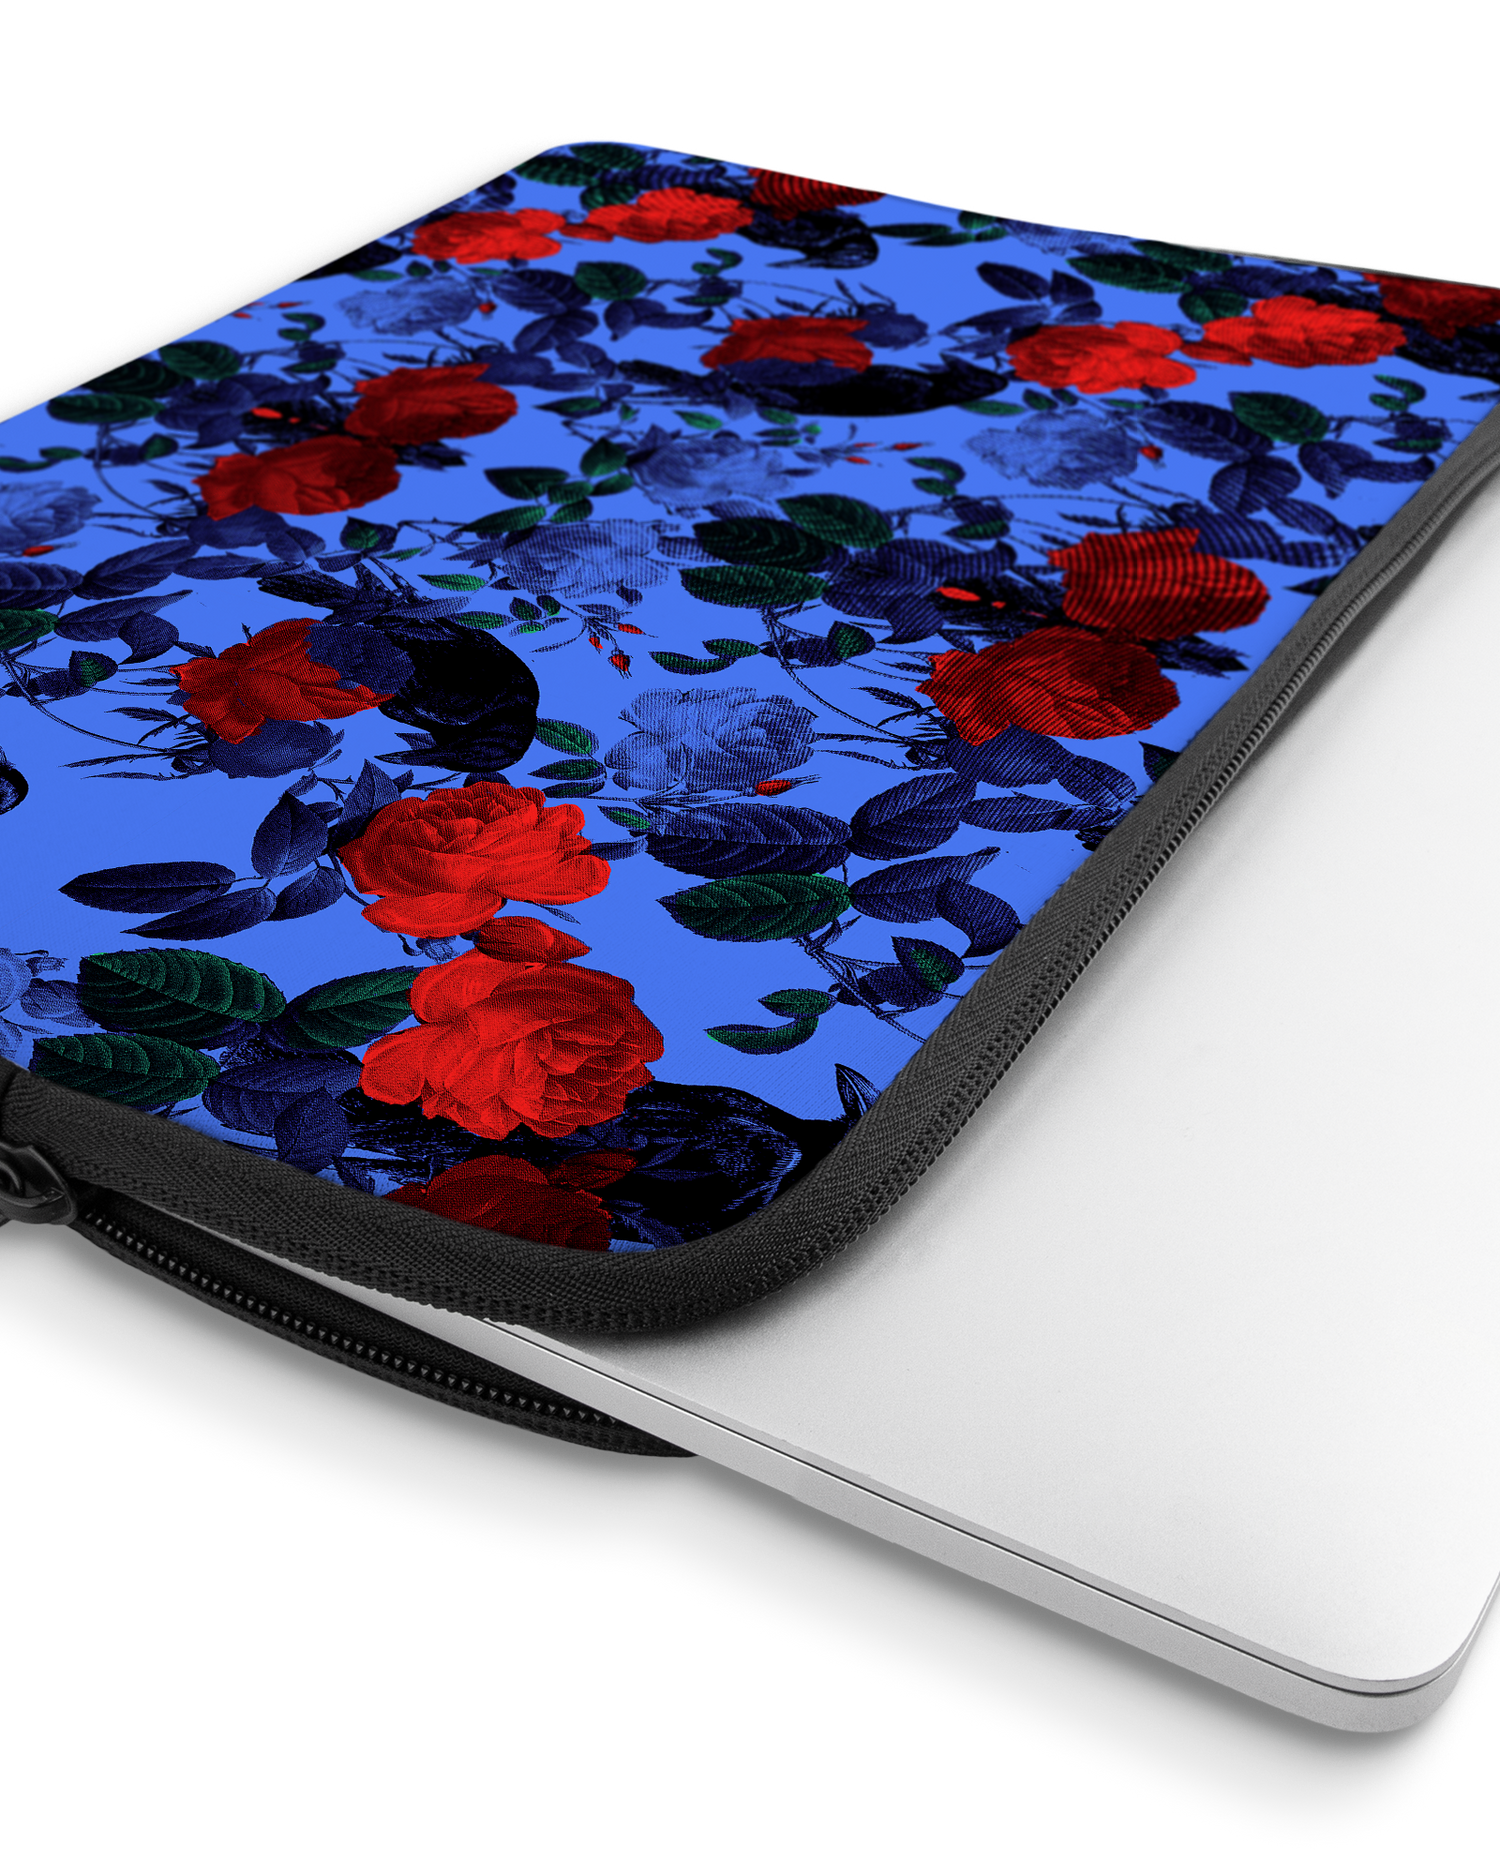 Roses And Ravens Laptop Case 13 inch with device inside